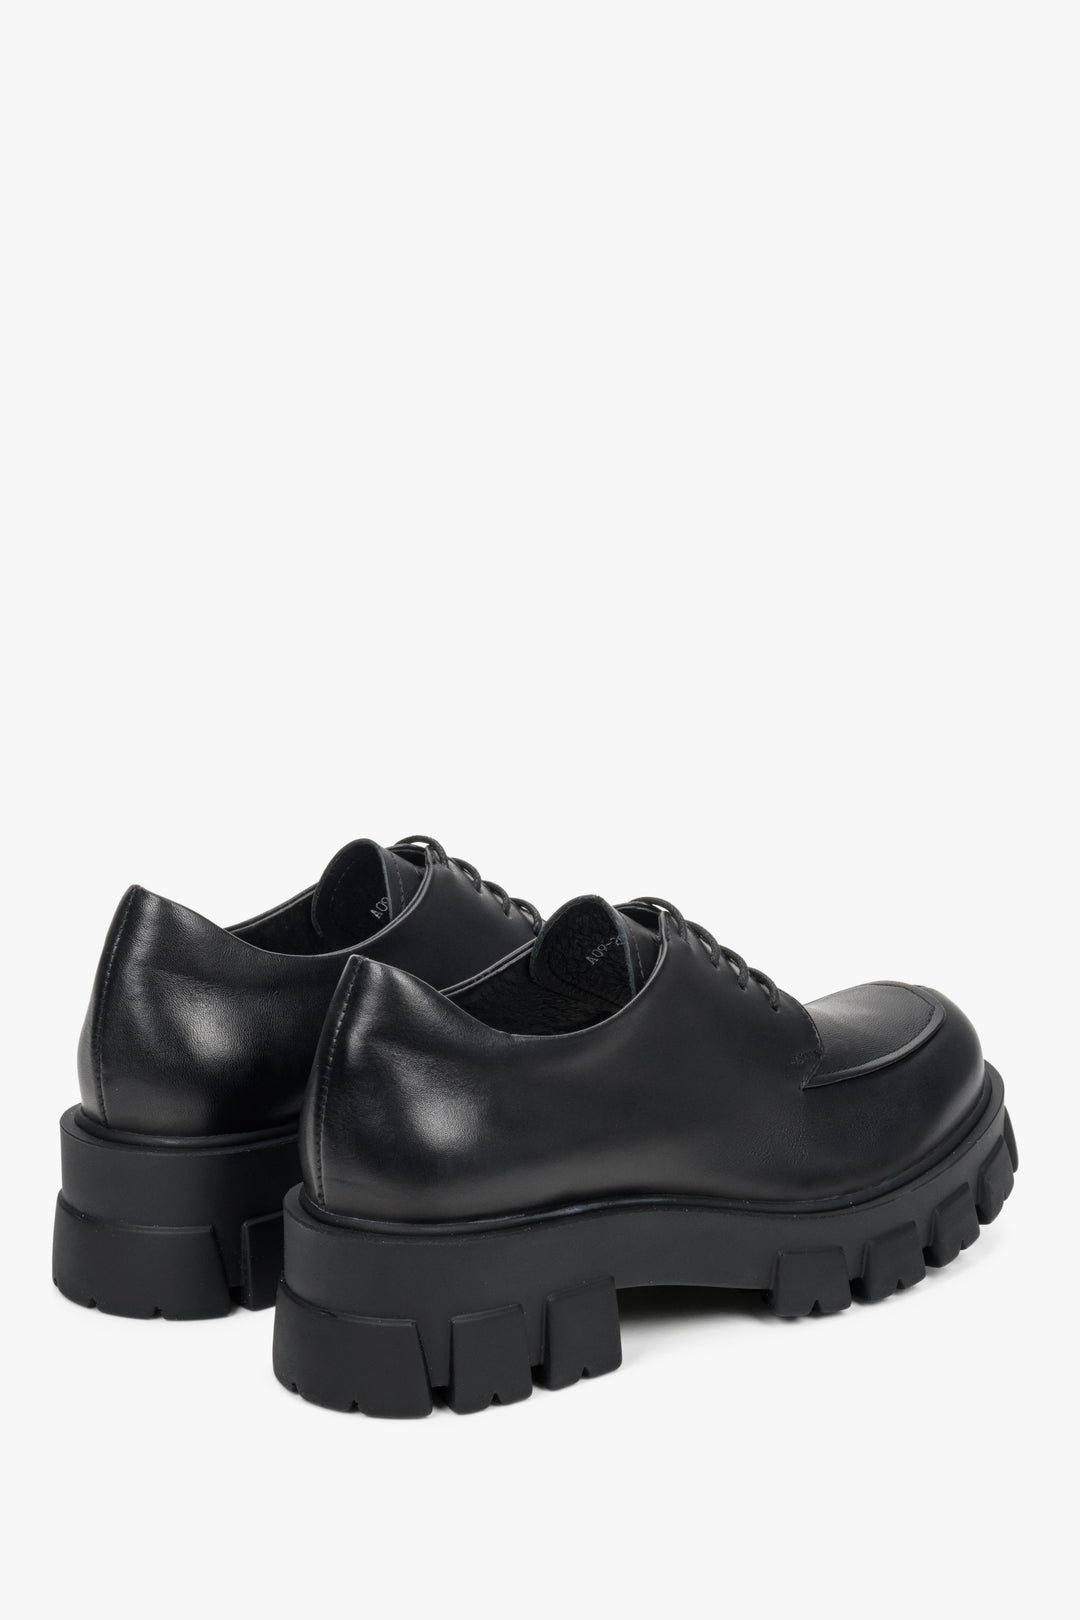 Lace-up women's leather shoes in black - close-up on the heel line and side seam.